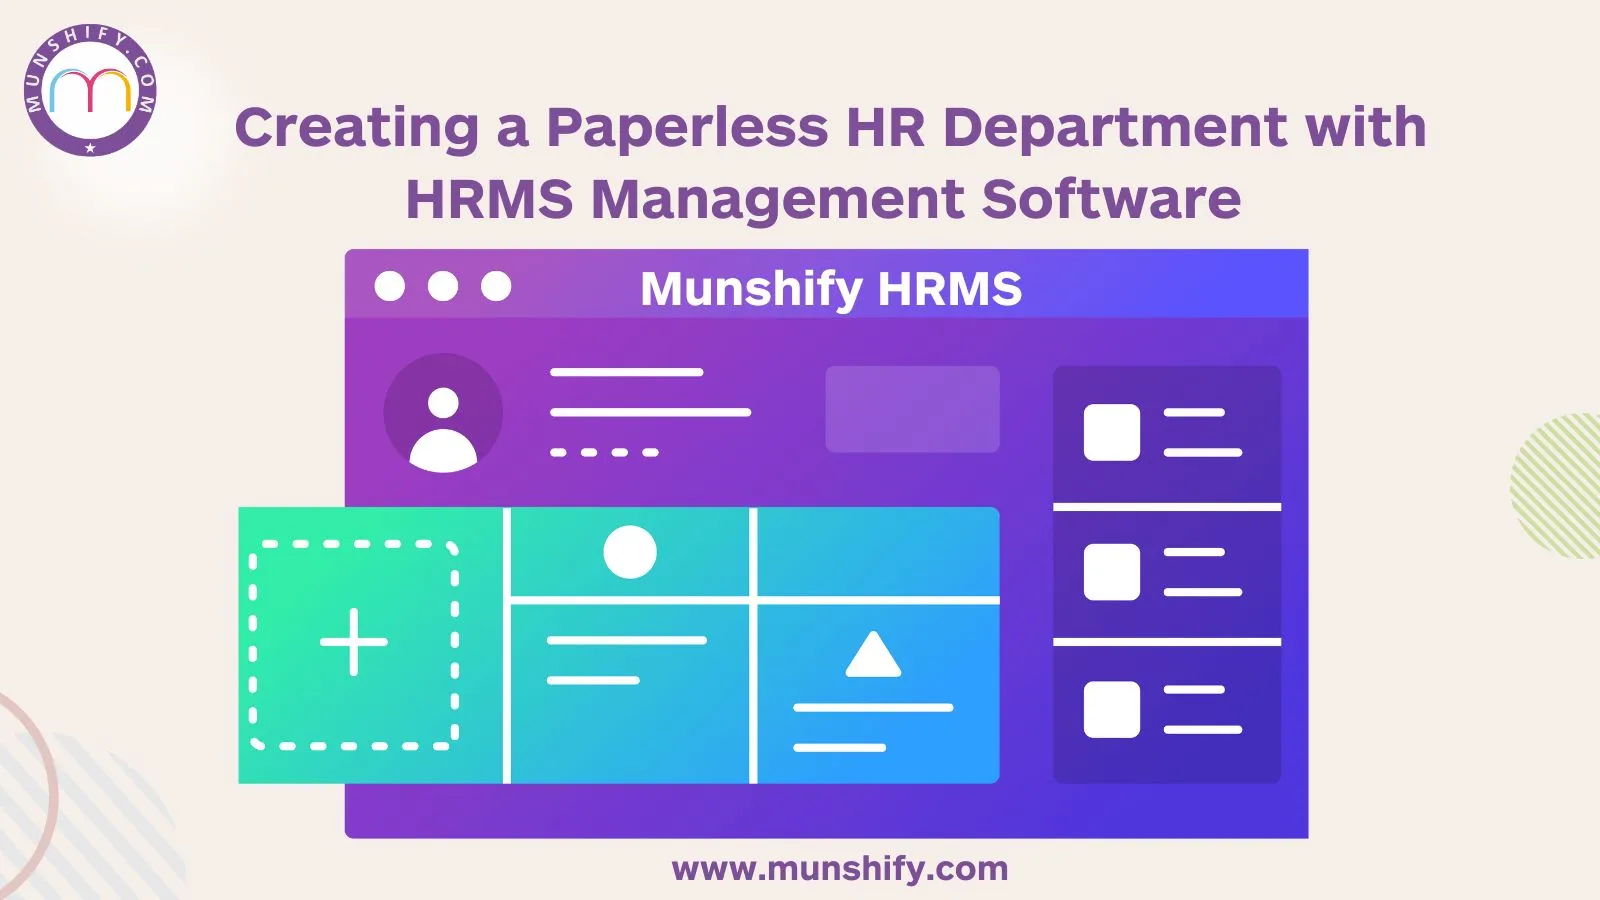 Creating a Paperless HR Department with HRMS Management Software